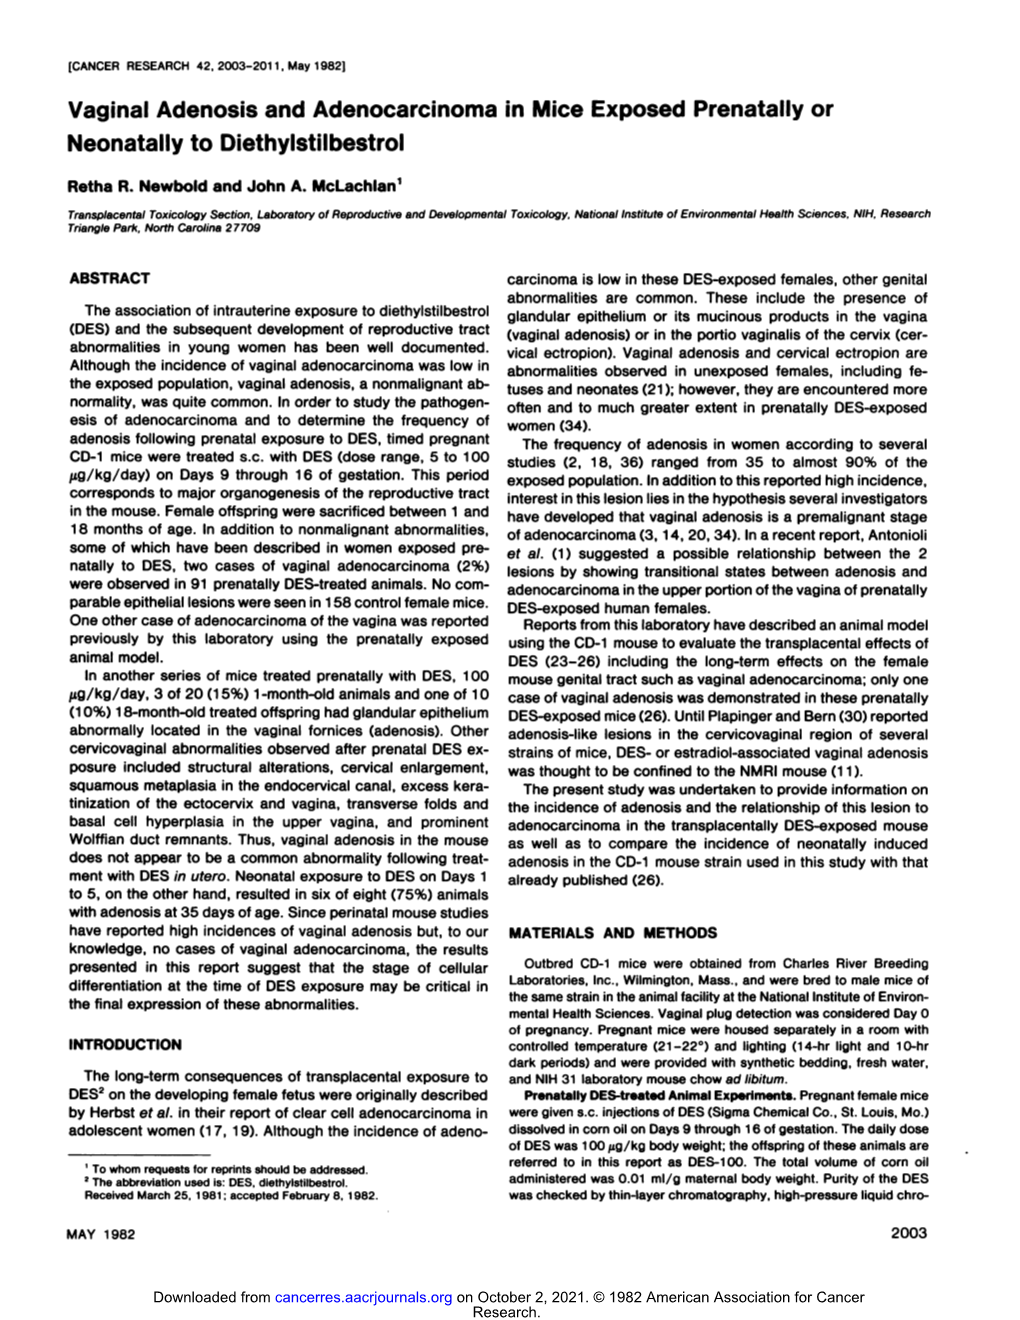 Vaginal Adenosis and Adenocarcinoma in Mice Exposed Prenatally Or Neonatally to Diethylstilbestrol